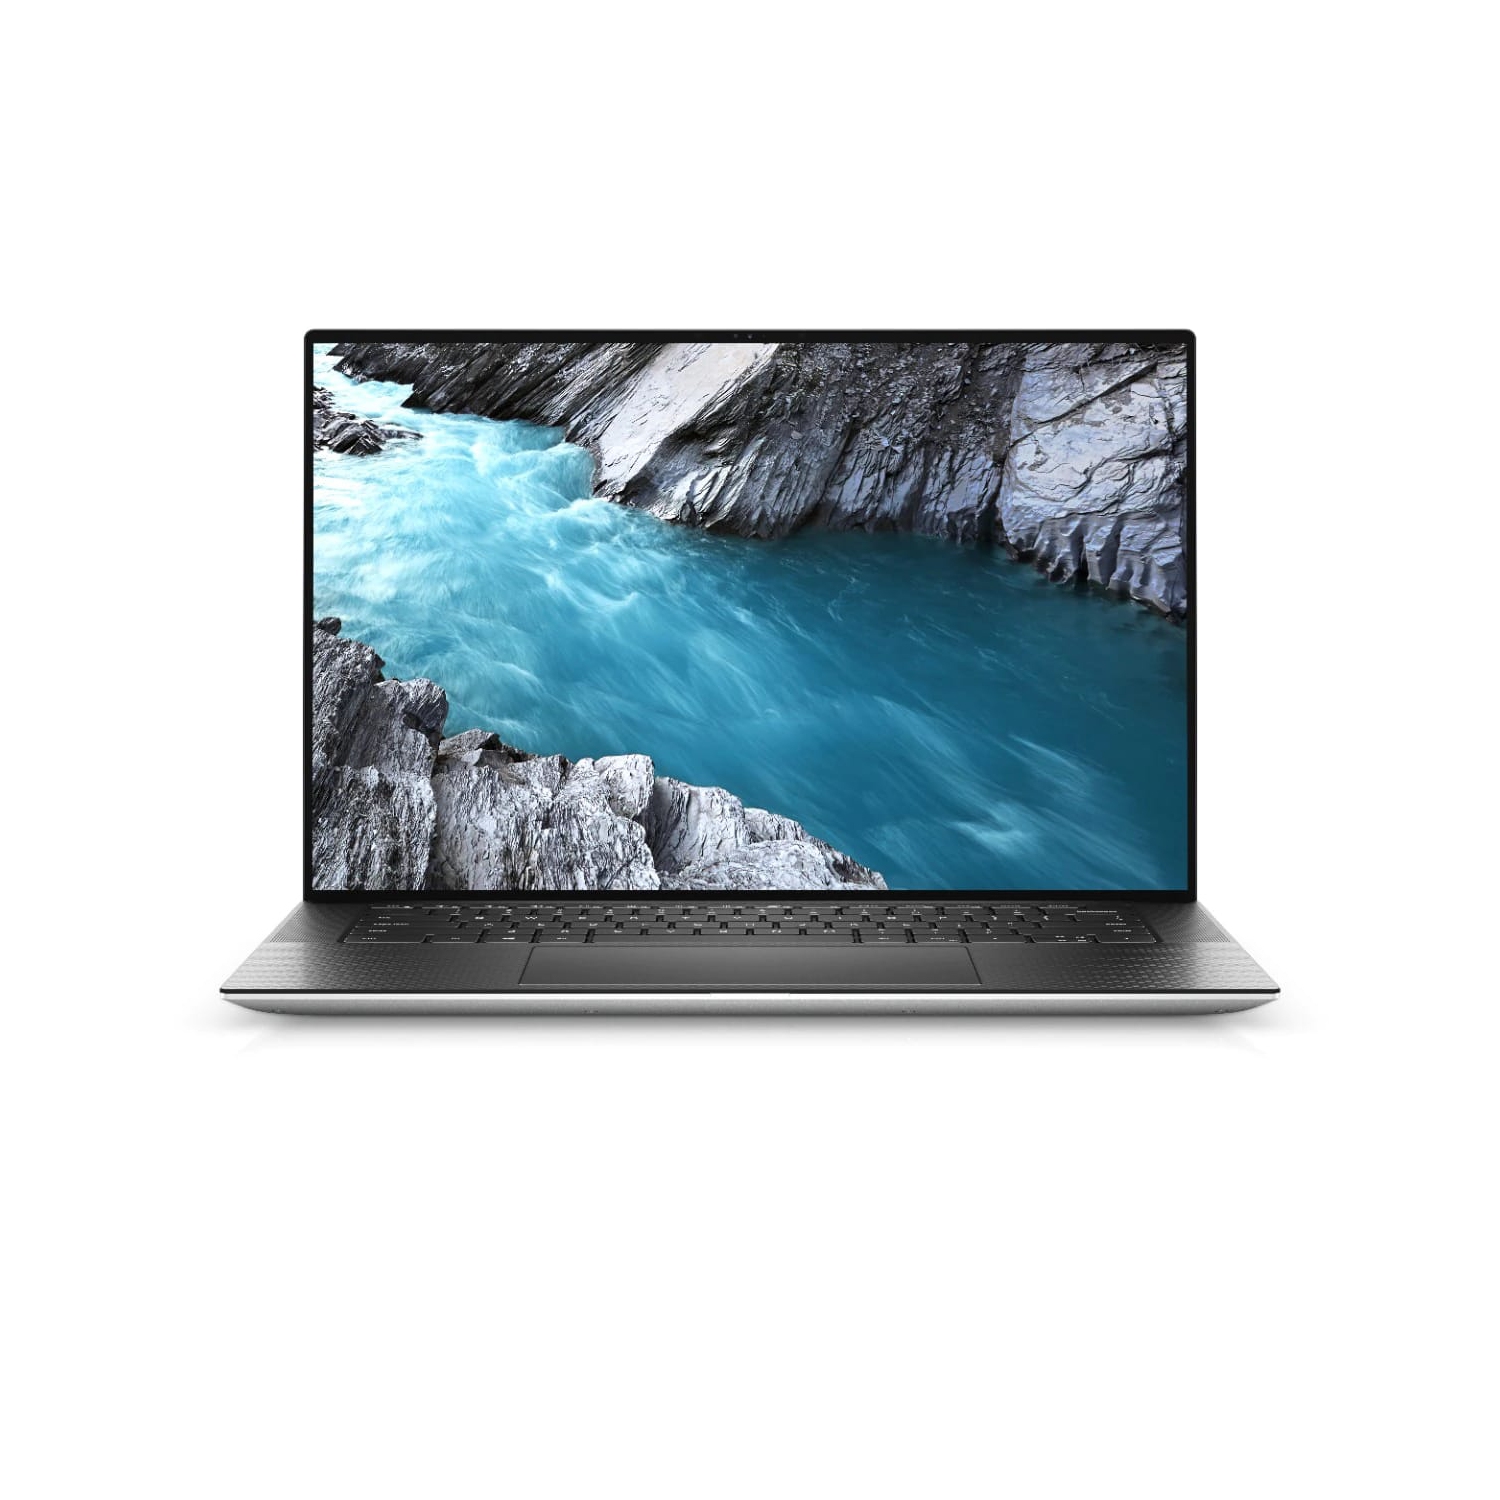 Refurbished (Excellent) – Dell XPS 9500 Laptop (2020) | 15" 4K Touch | Core i7 - 2TB SSD - 64GB RAM - 1650 Ti | 8 Cores @ 5.1 GHz - 10th Gen CPU